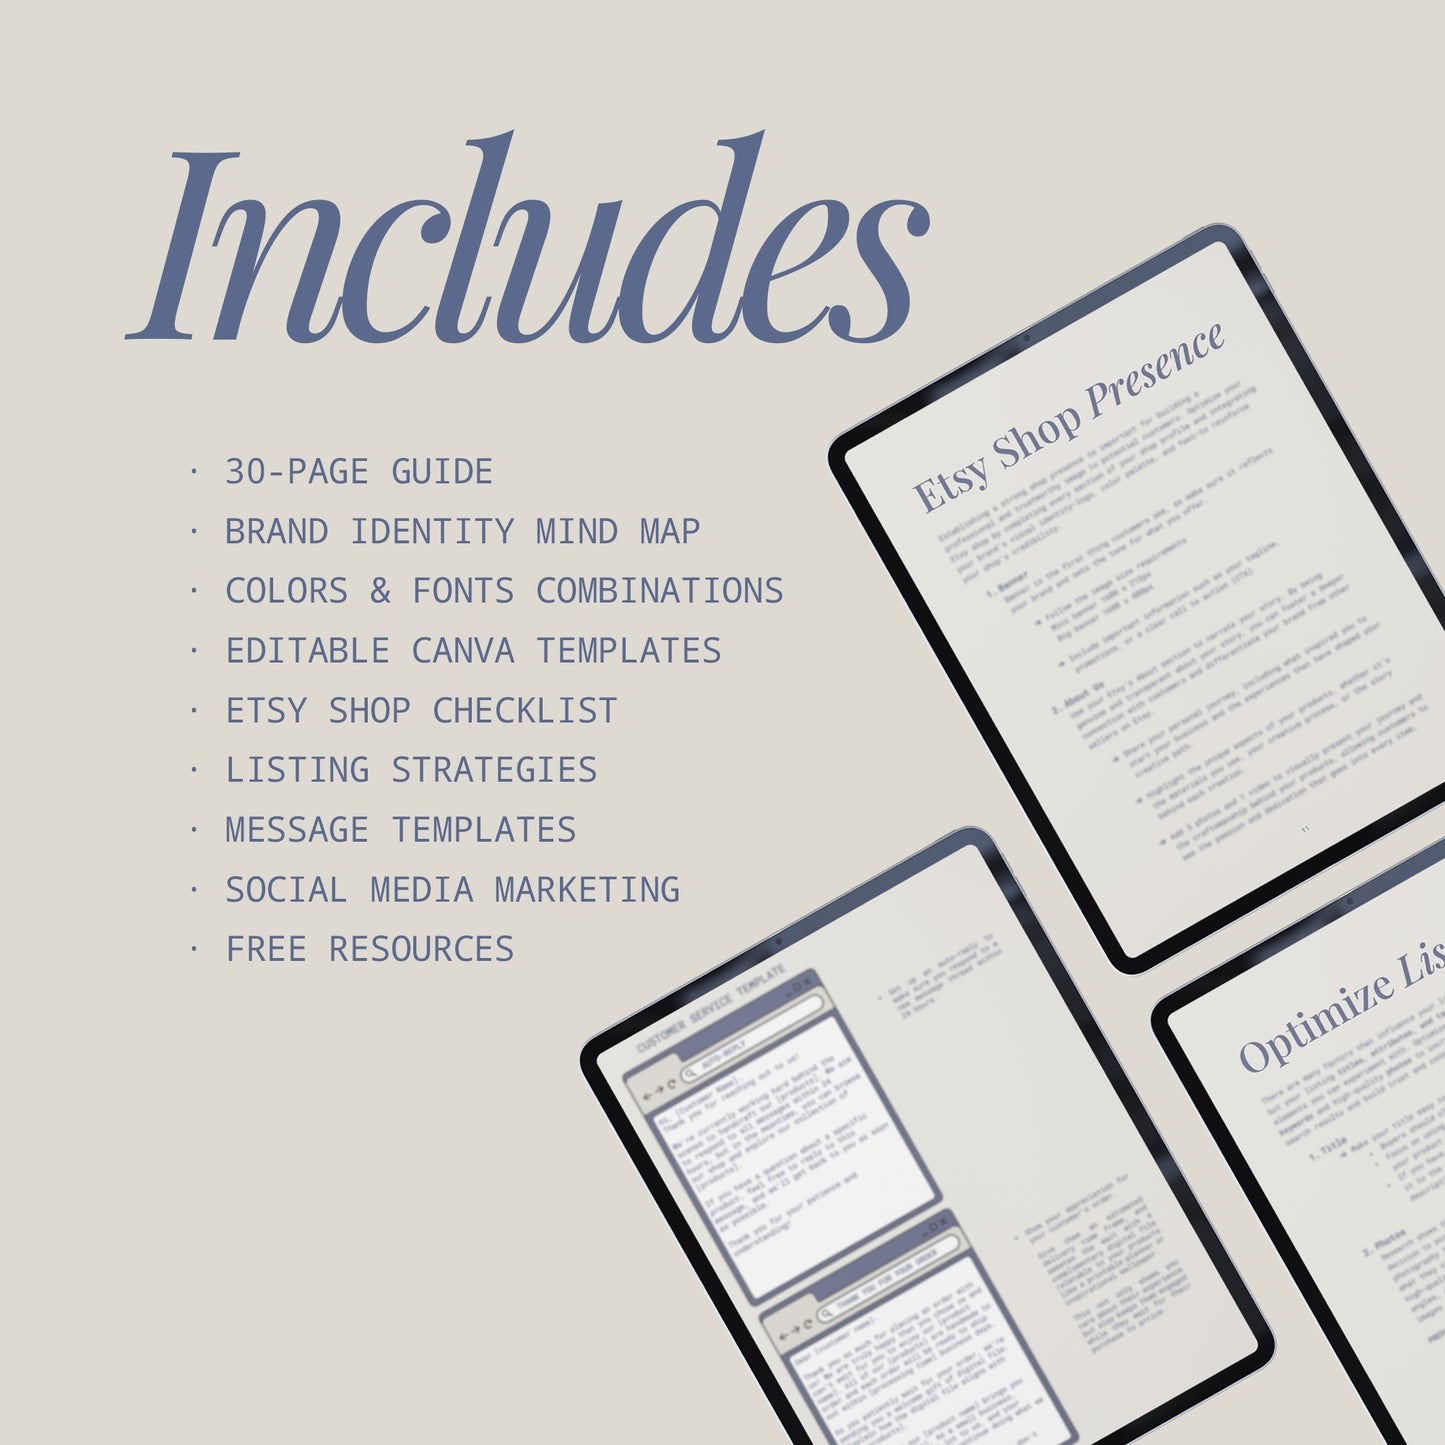 iPad screens displaying 30-page ebook, which includes brand identity mind map, colors & fonts combinations, editable Canva templates, Etsy shop checklist, listing strategies, message templates, social media marketing, and free resources